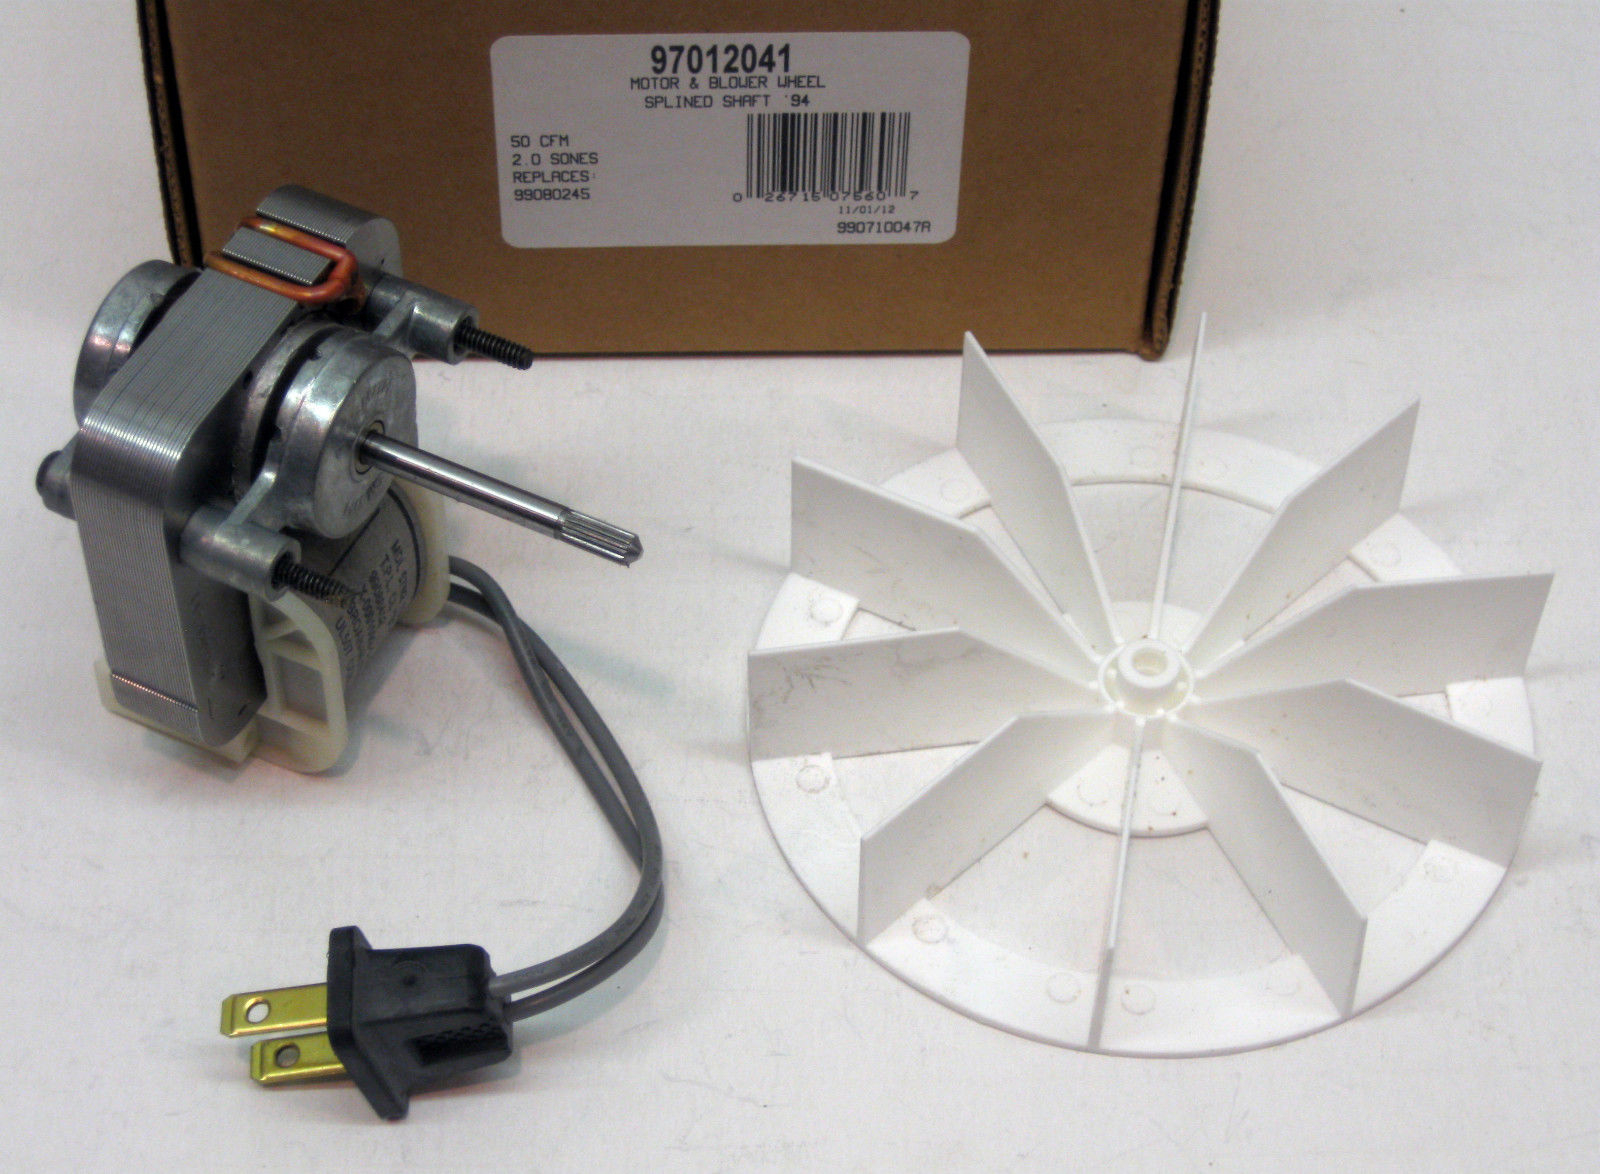 Broan Bathroom Fan Replacement Motor Image Of Bathroom And throughout proportions 1600 X 1174